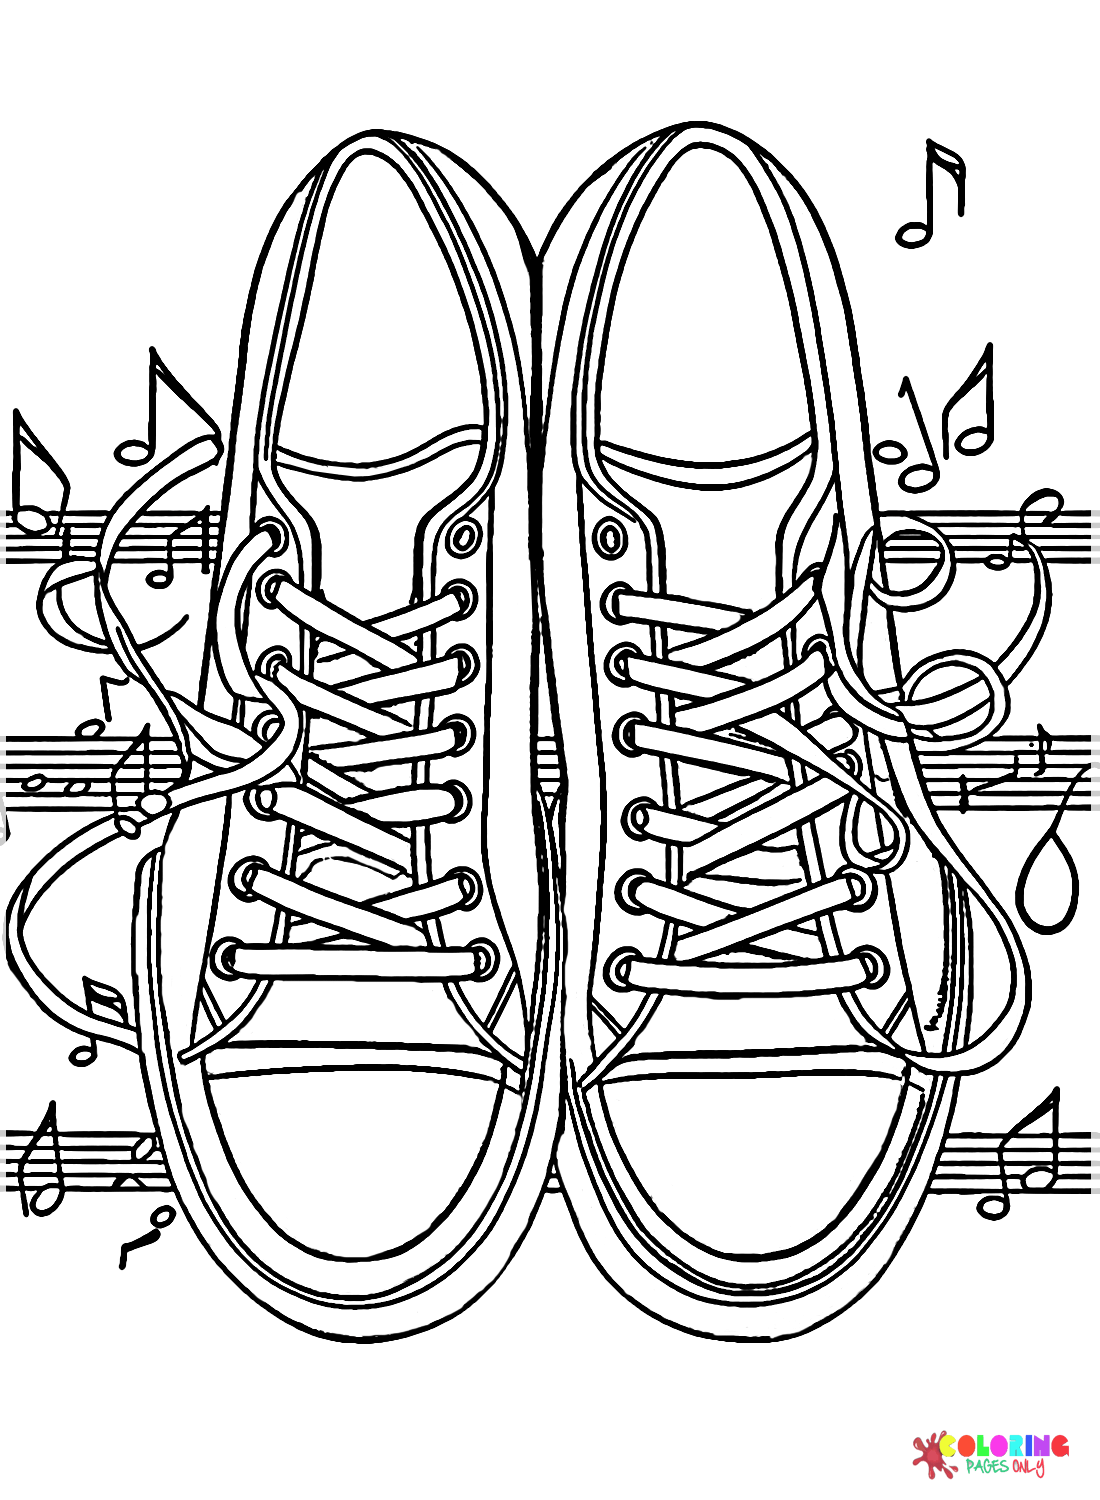 Sneakers with Musical Notes from Sneaker